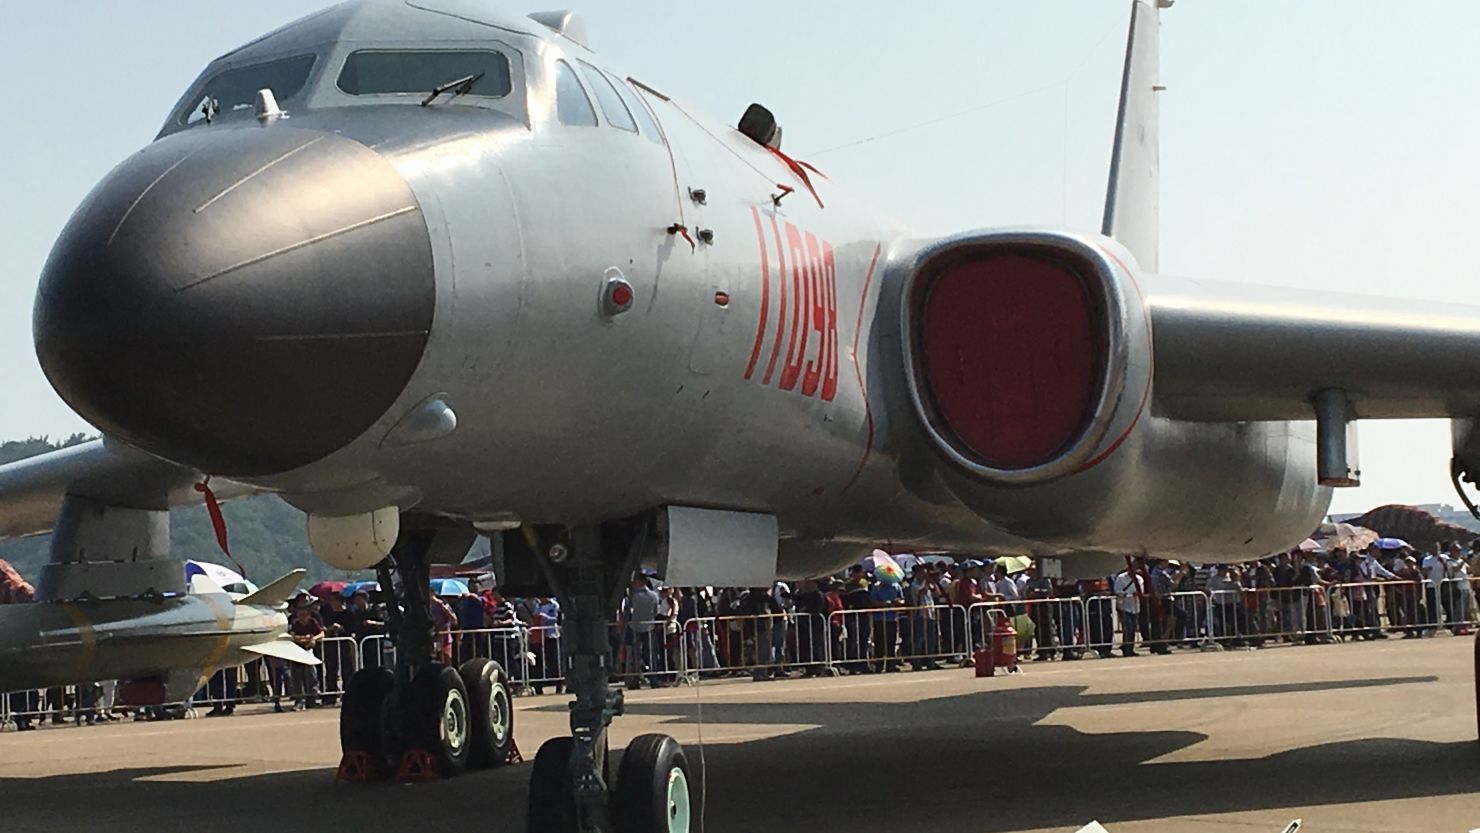 A People's Liberation Army Air Force H-6K bomber on display at Airshow China in 2016.